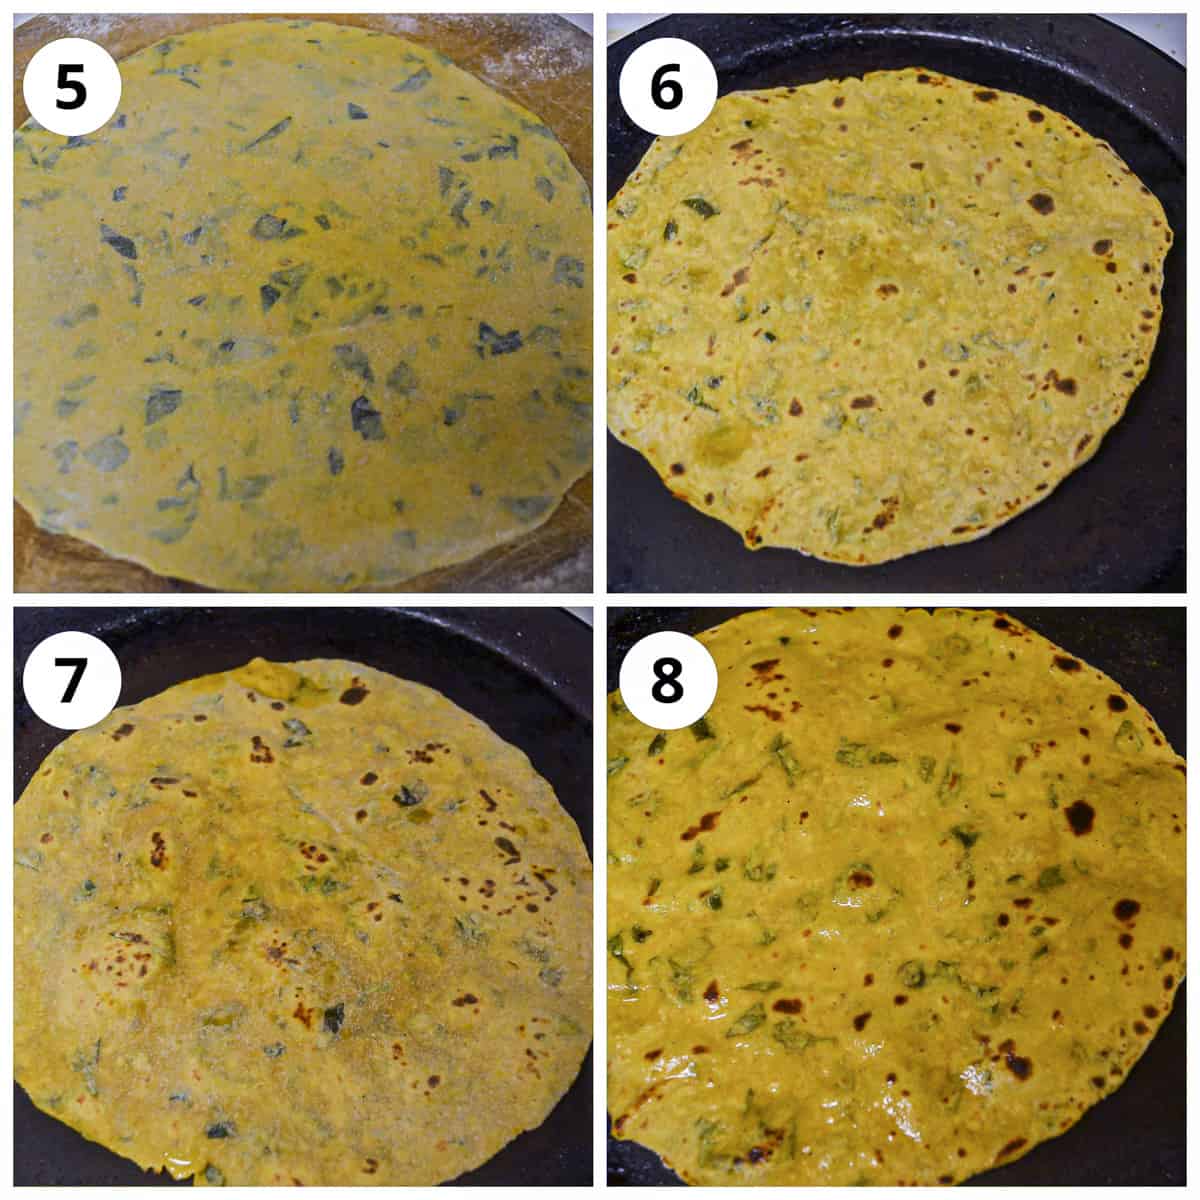 Steps for rolling and roasting the methi thepla